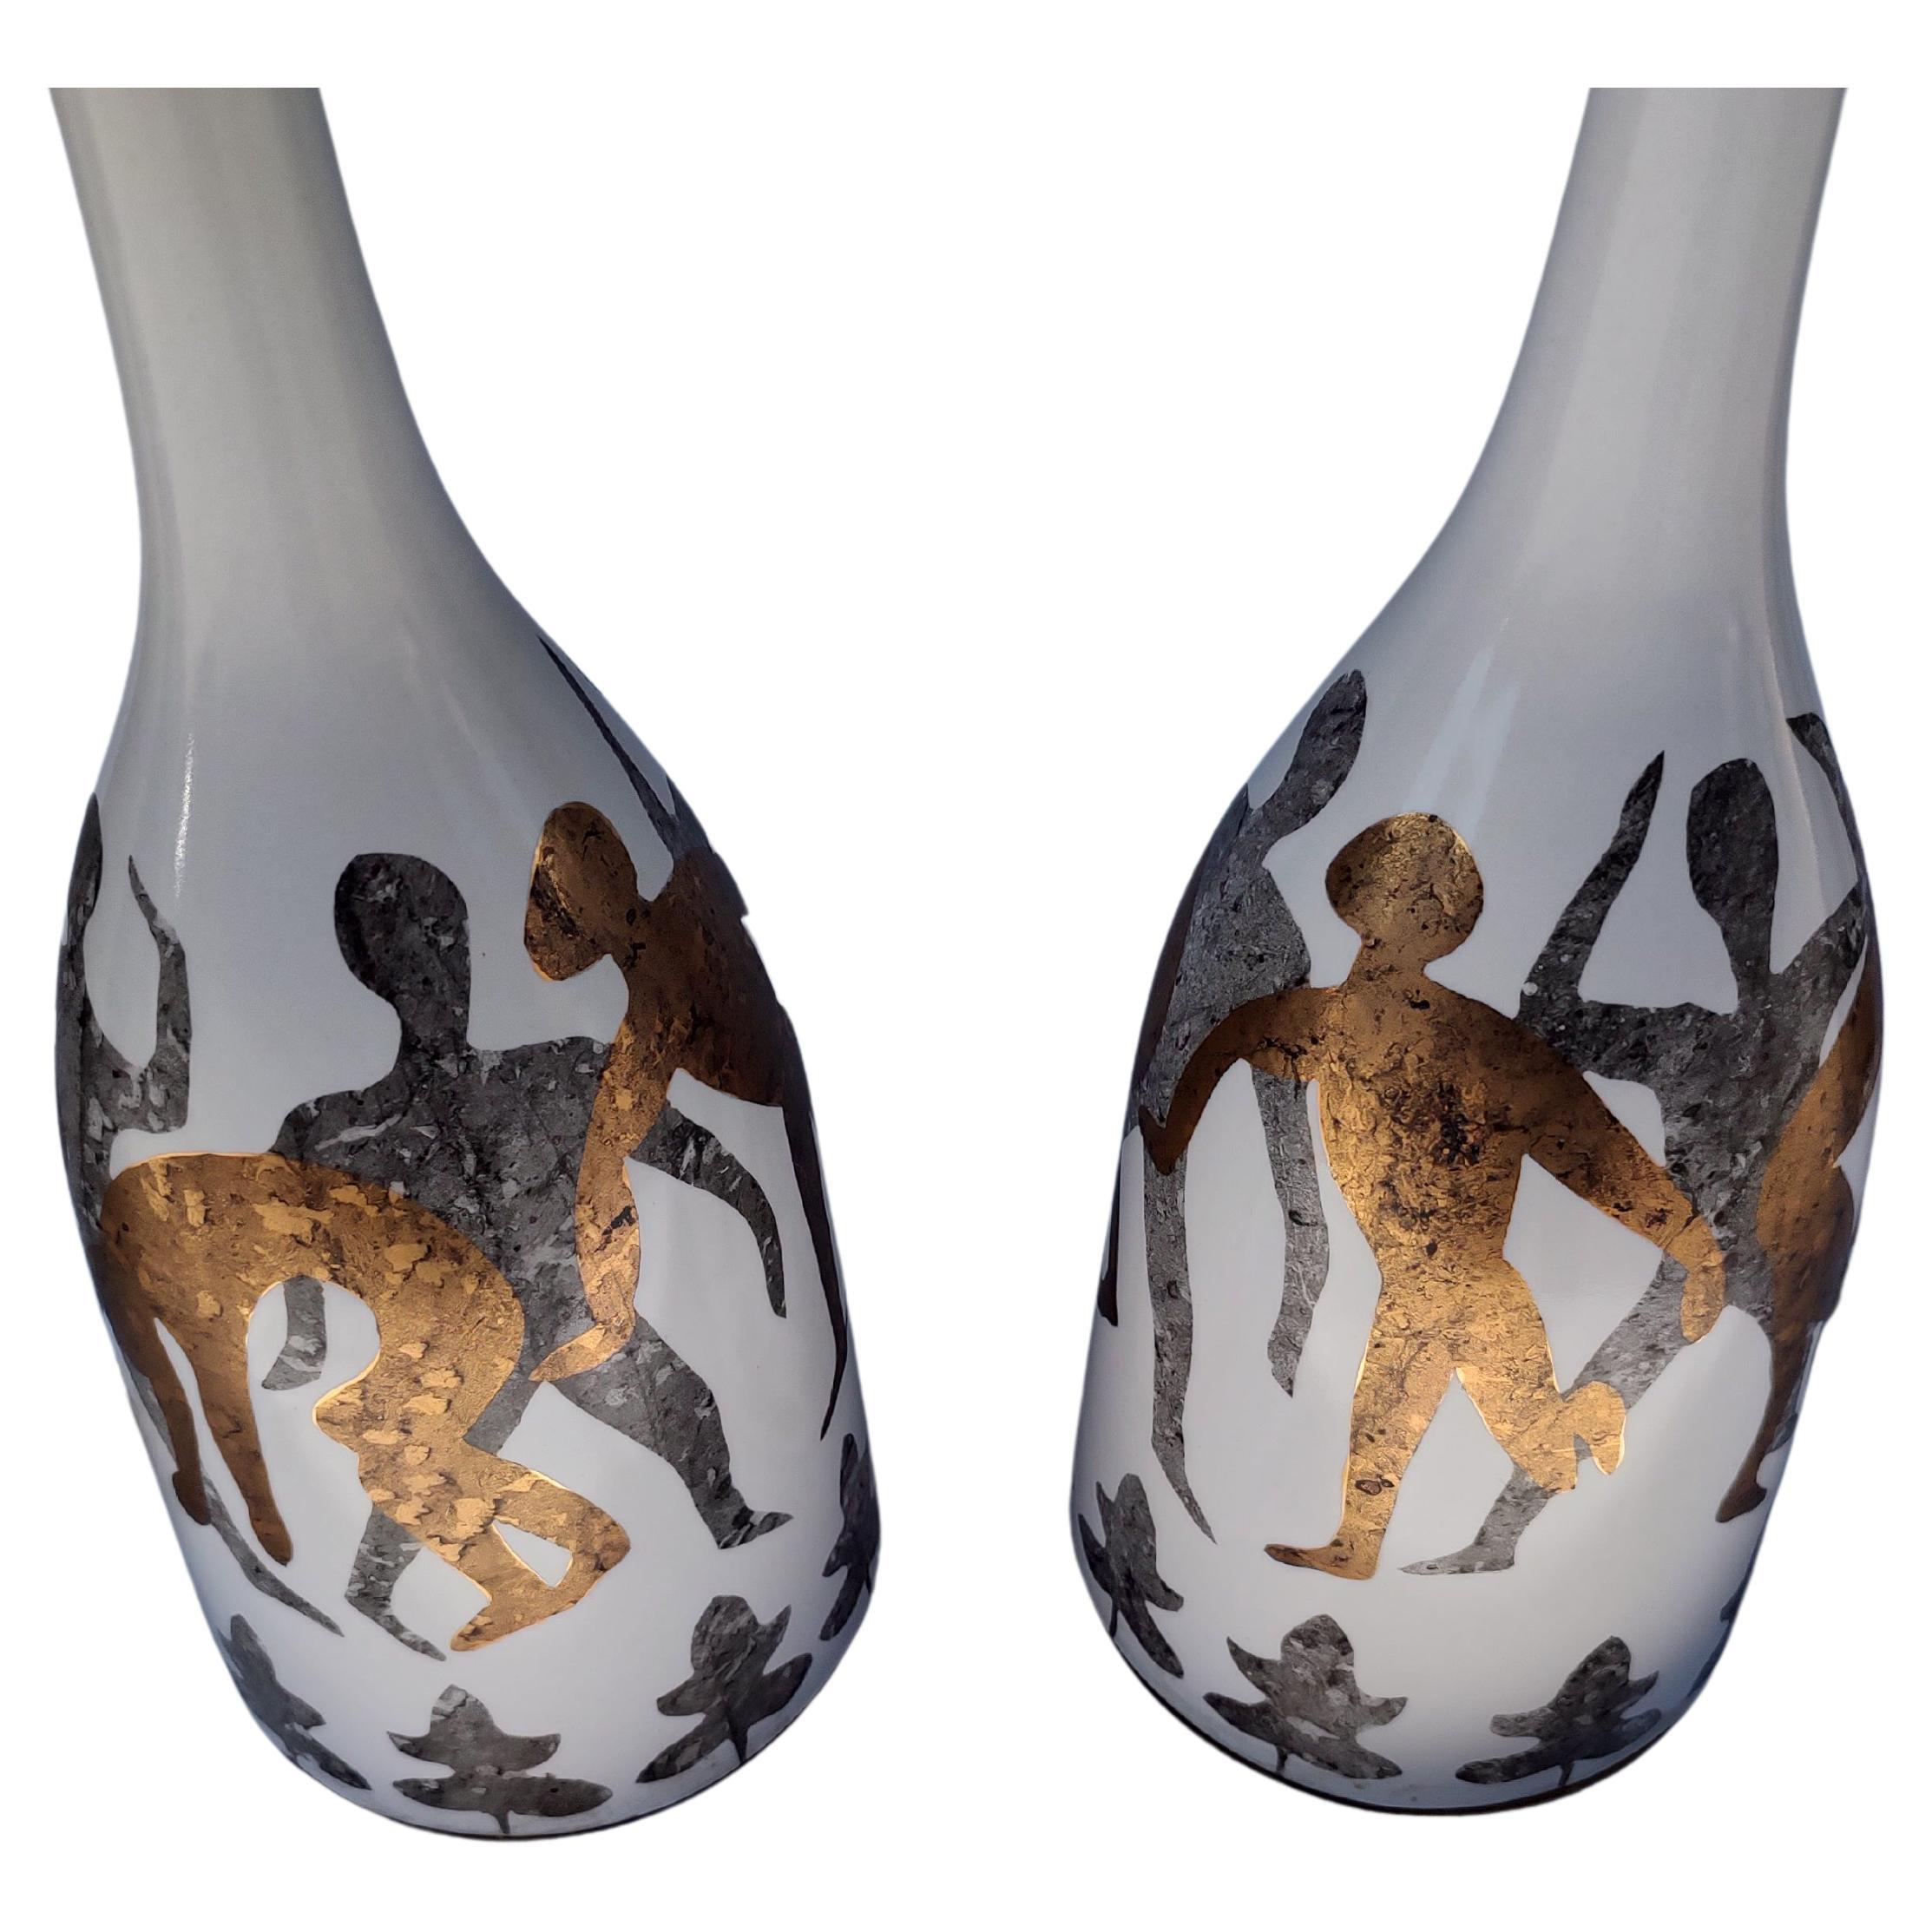 Pair of Mid-Century Modern Bottle Form Table Lamps with Gilt Figural Acrobats   In Good Condition For Sale In Port Jervis, NY